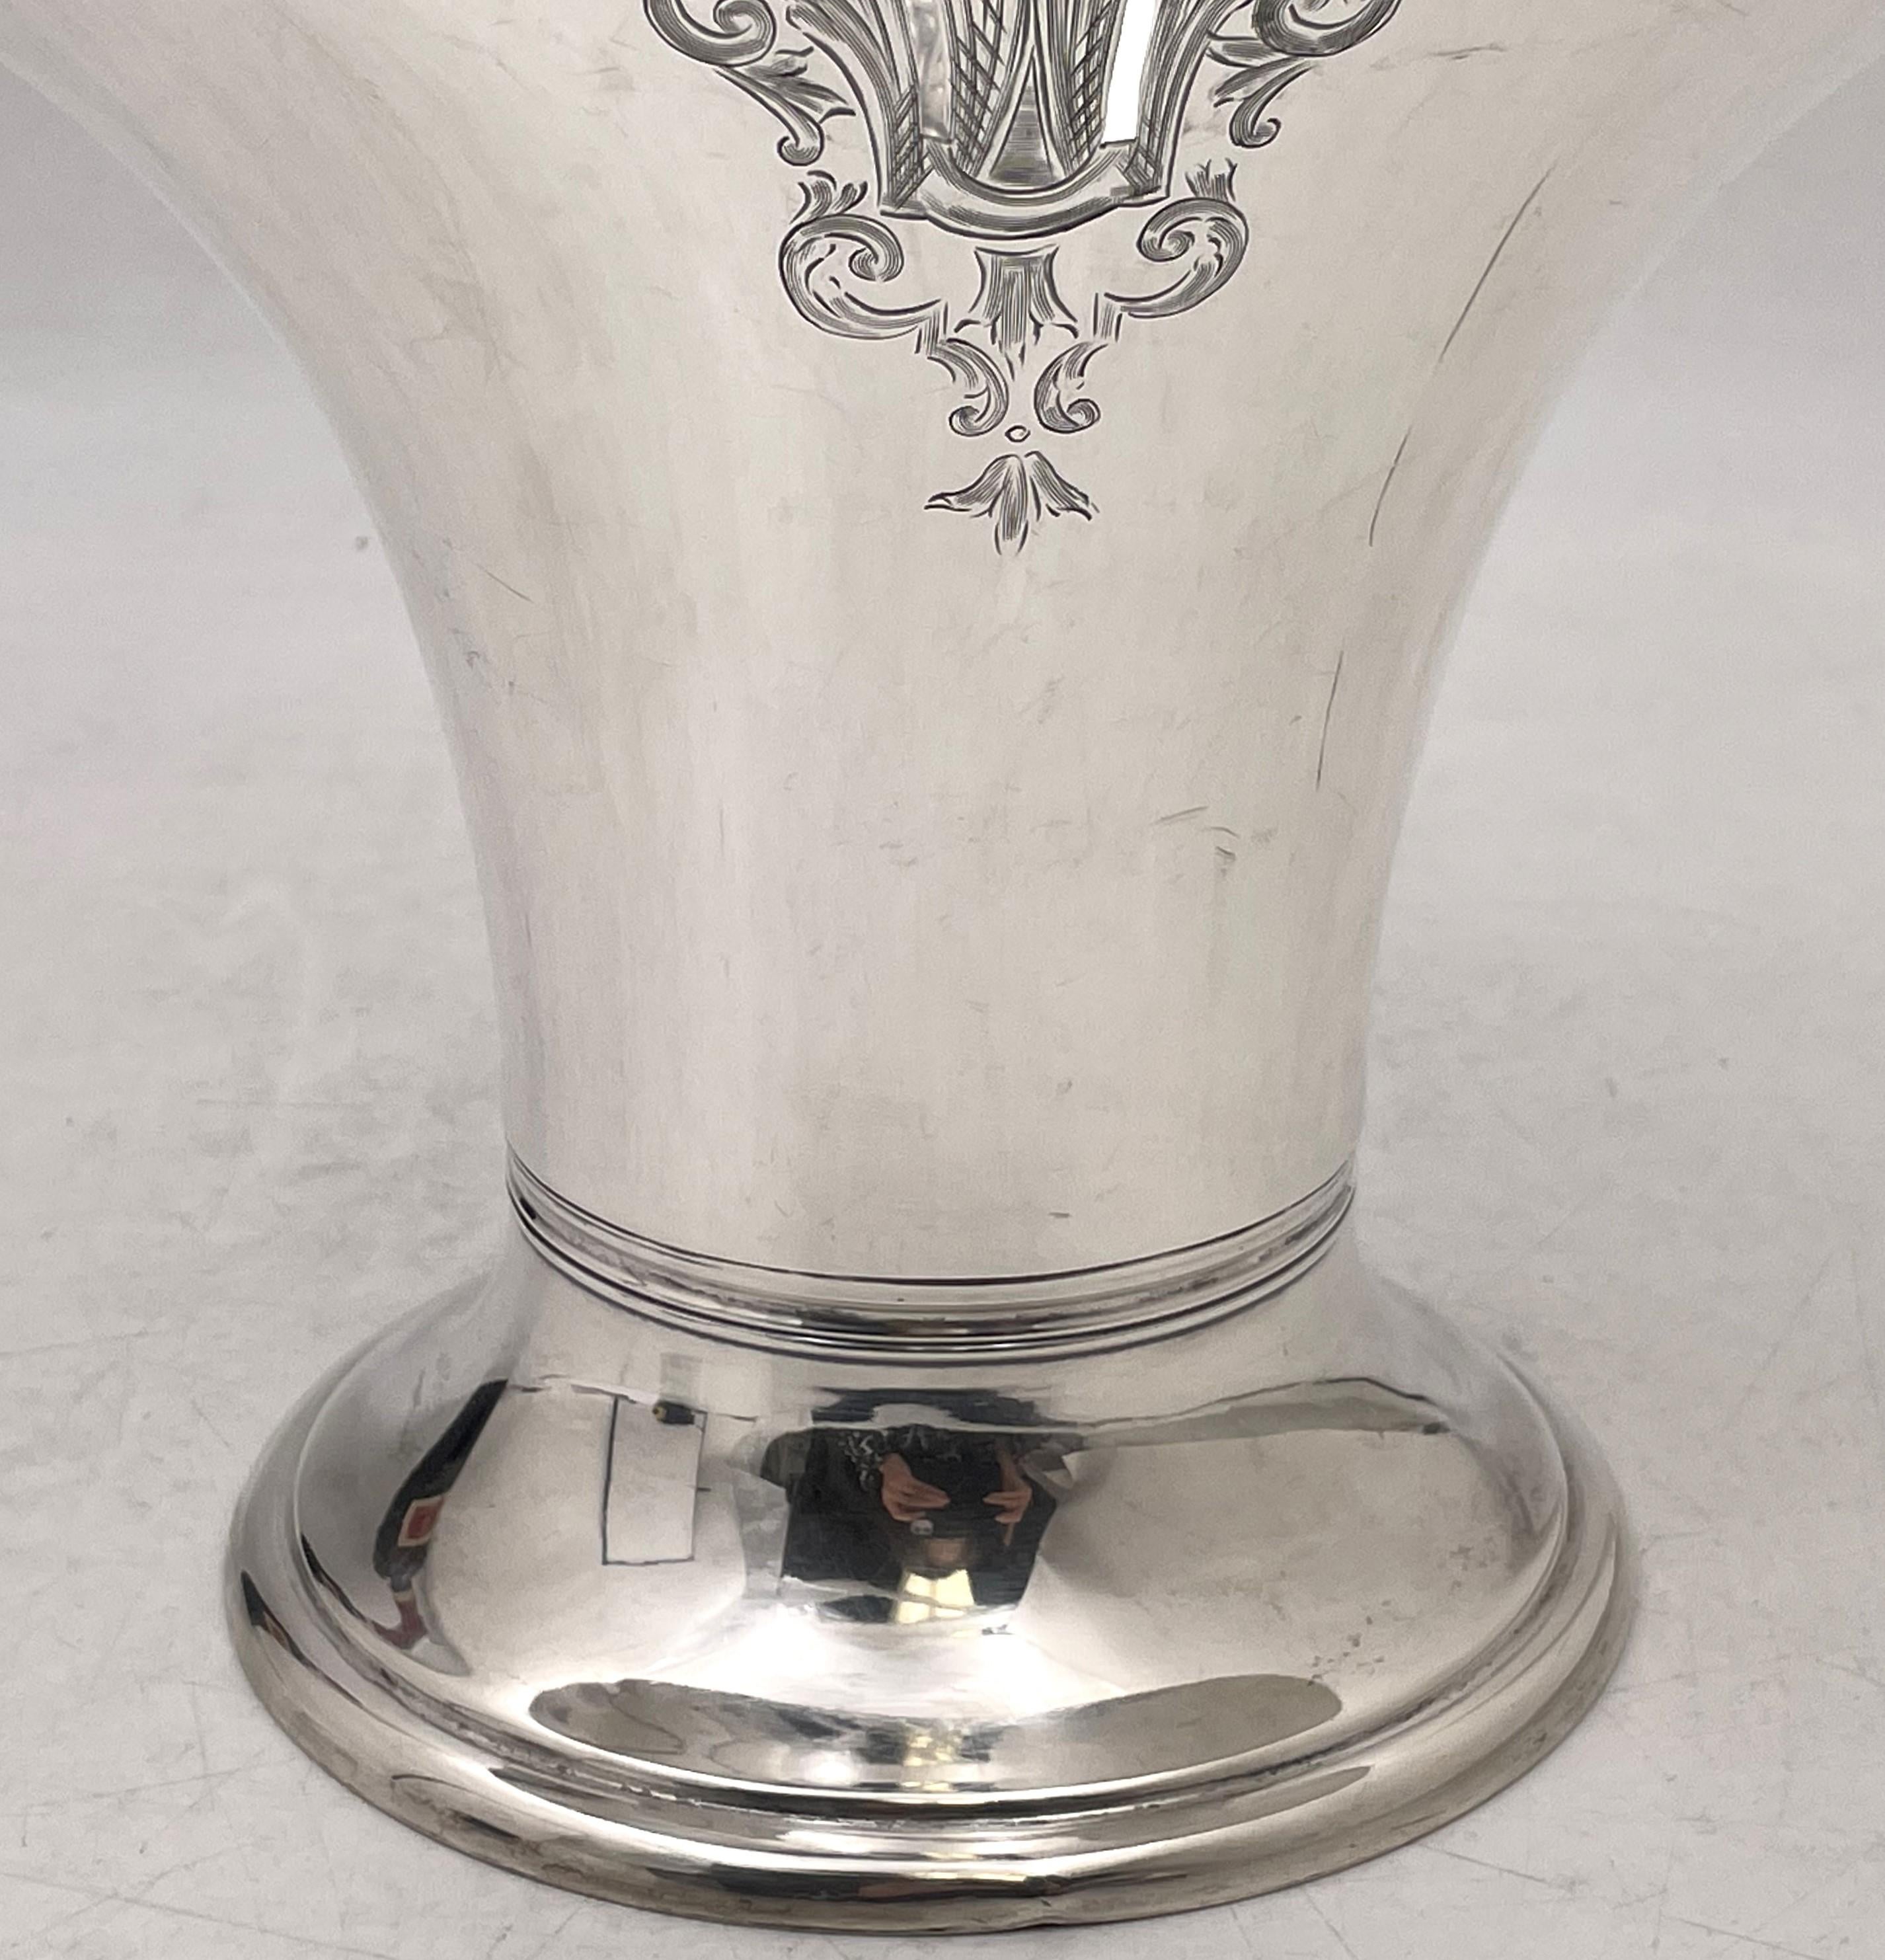 Gorham Sterling Silver 1915 Basket Bowl in Art Nouveau Style with Pierced Motifs For Sale 4